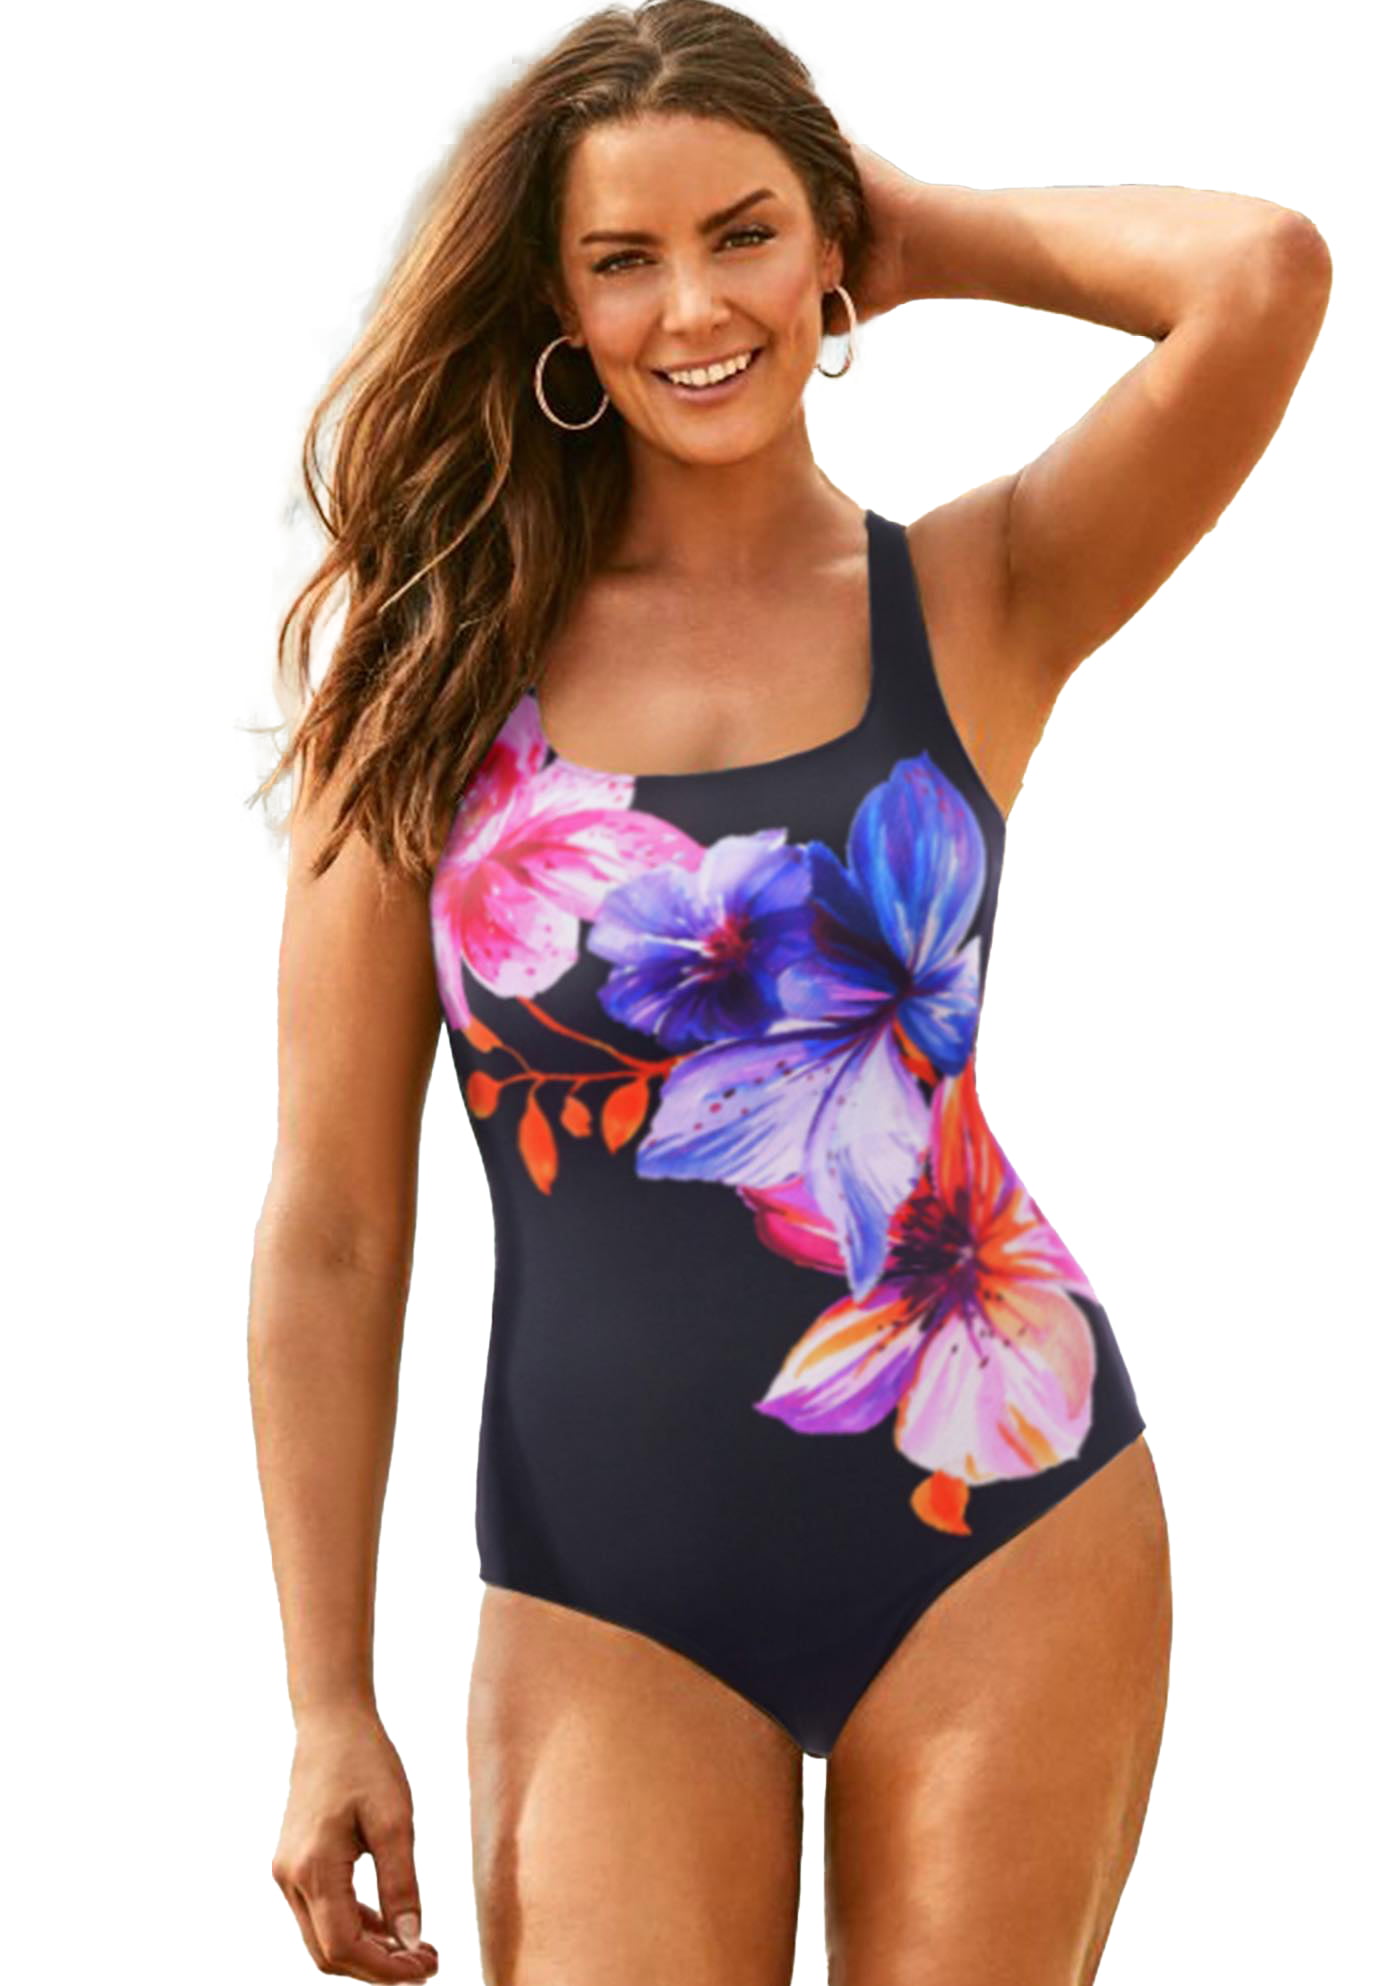 This Gorgeous sweet Daisy Royal Blue one-piece swimsuit for all figures will bring out your best features Blue Swimwear